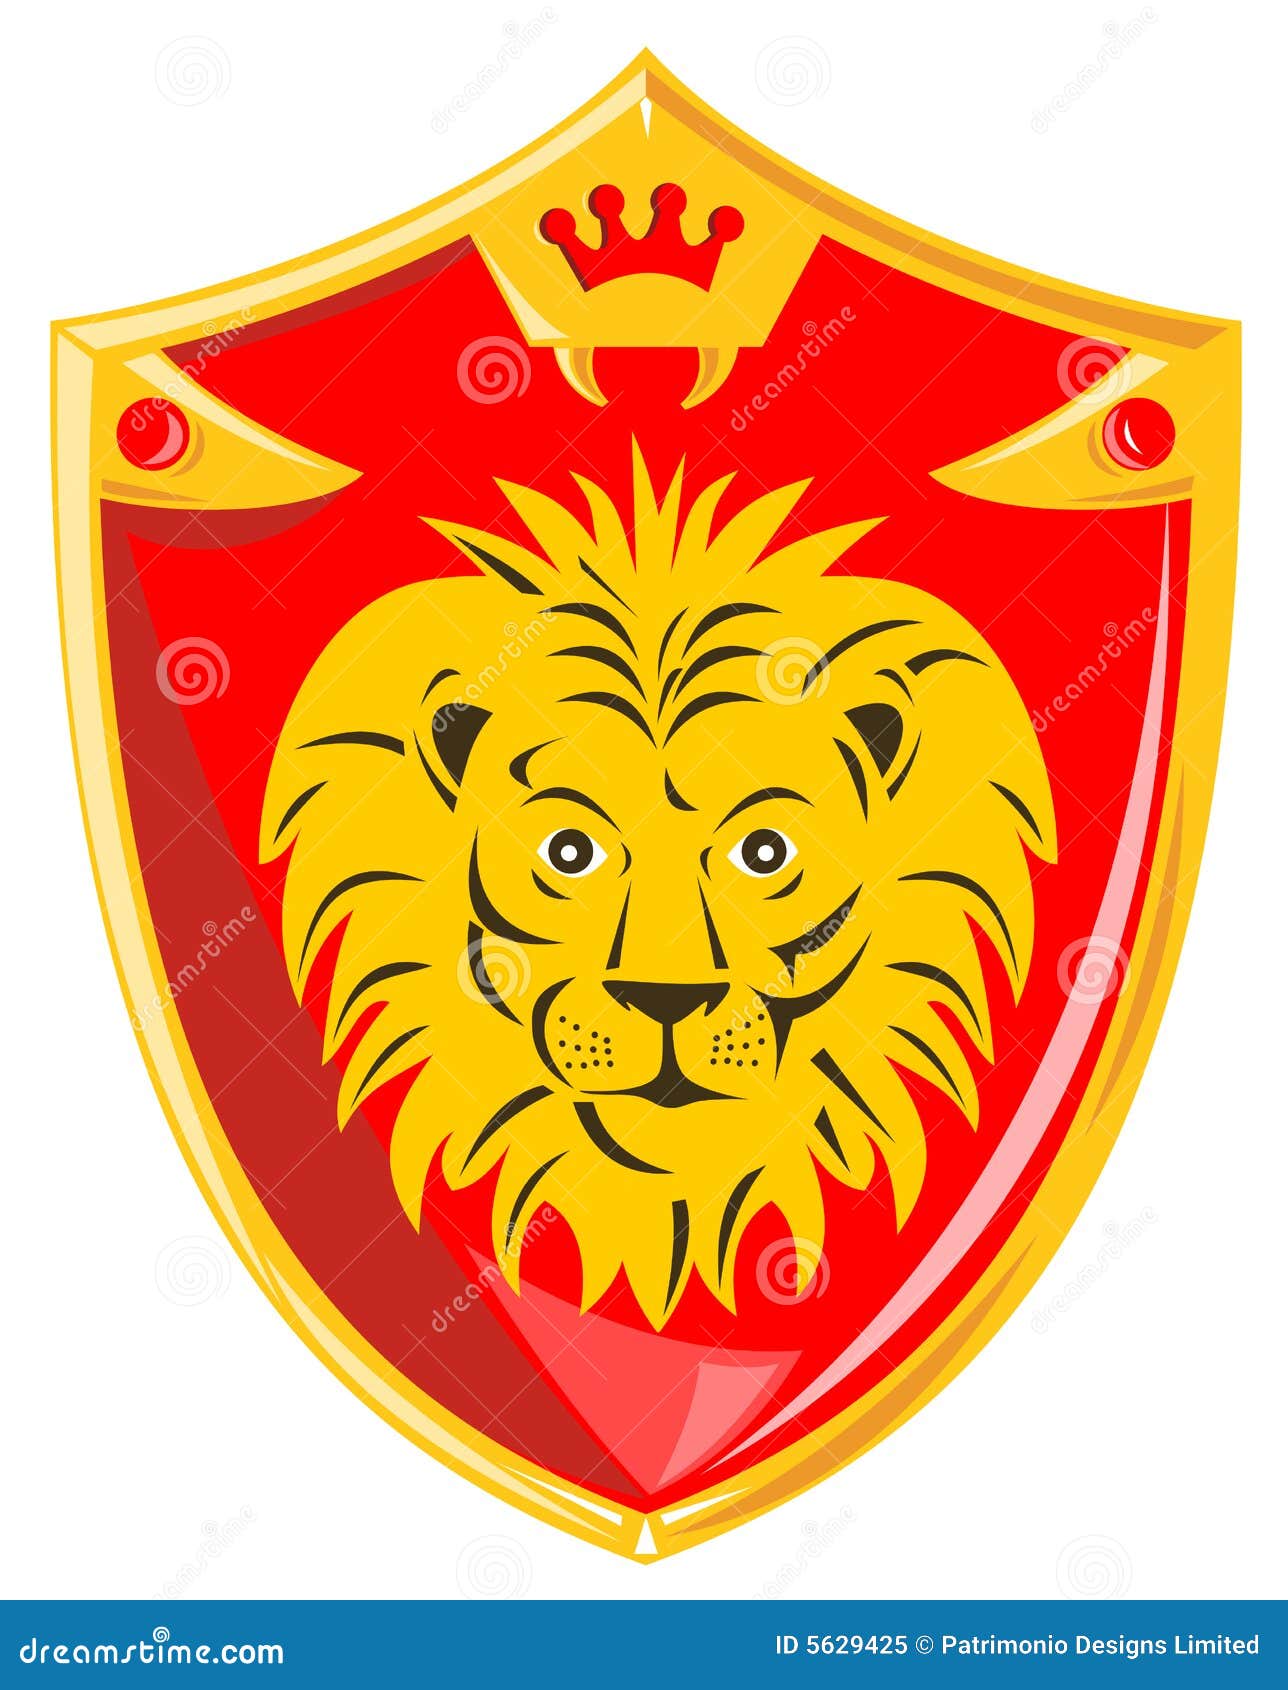 Premium AI Image  A lion with a sword and a shield on his chest